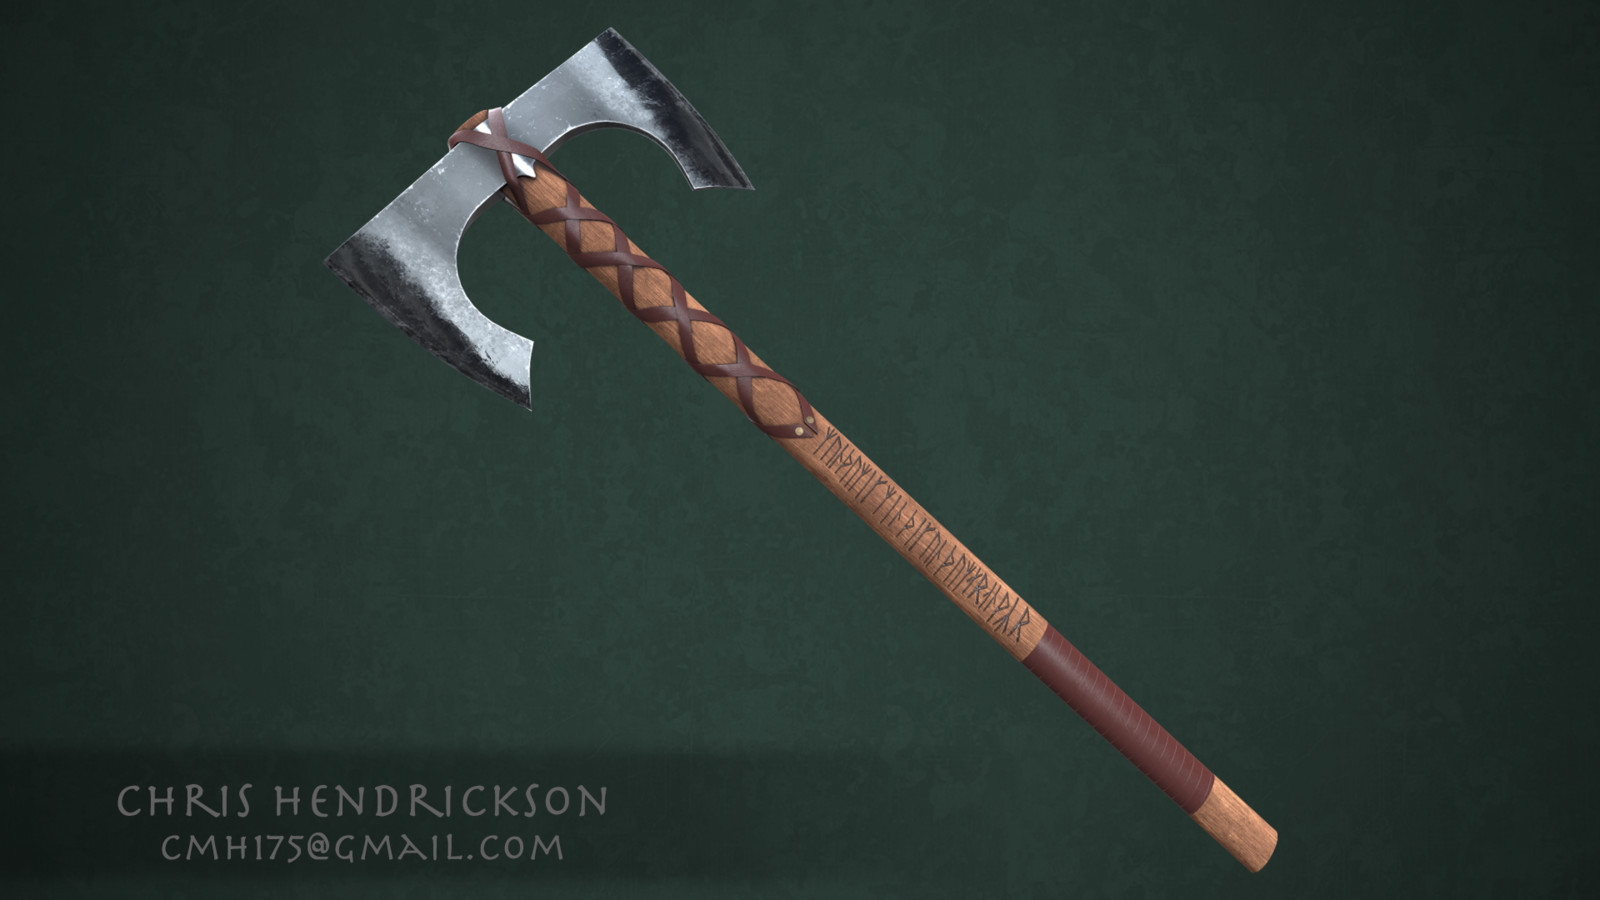 Week 4: Battle Axe Final. Redid game res model, down to 30k tris, with newly painted textures. Went for a more battle worn look than the pristine appearance in the reference. 